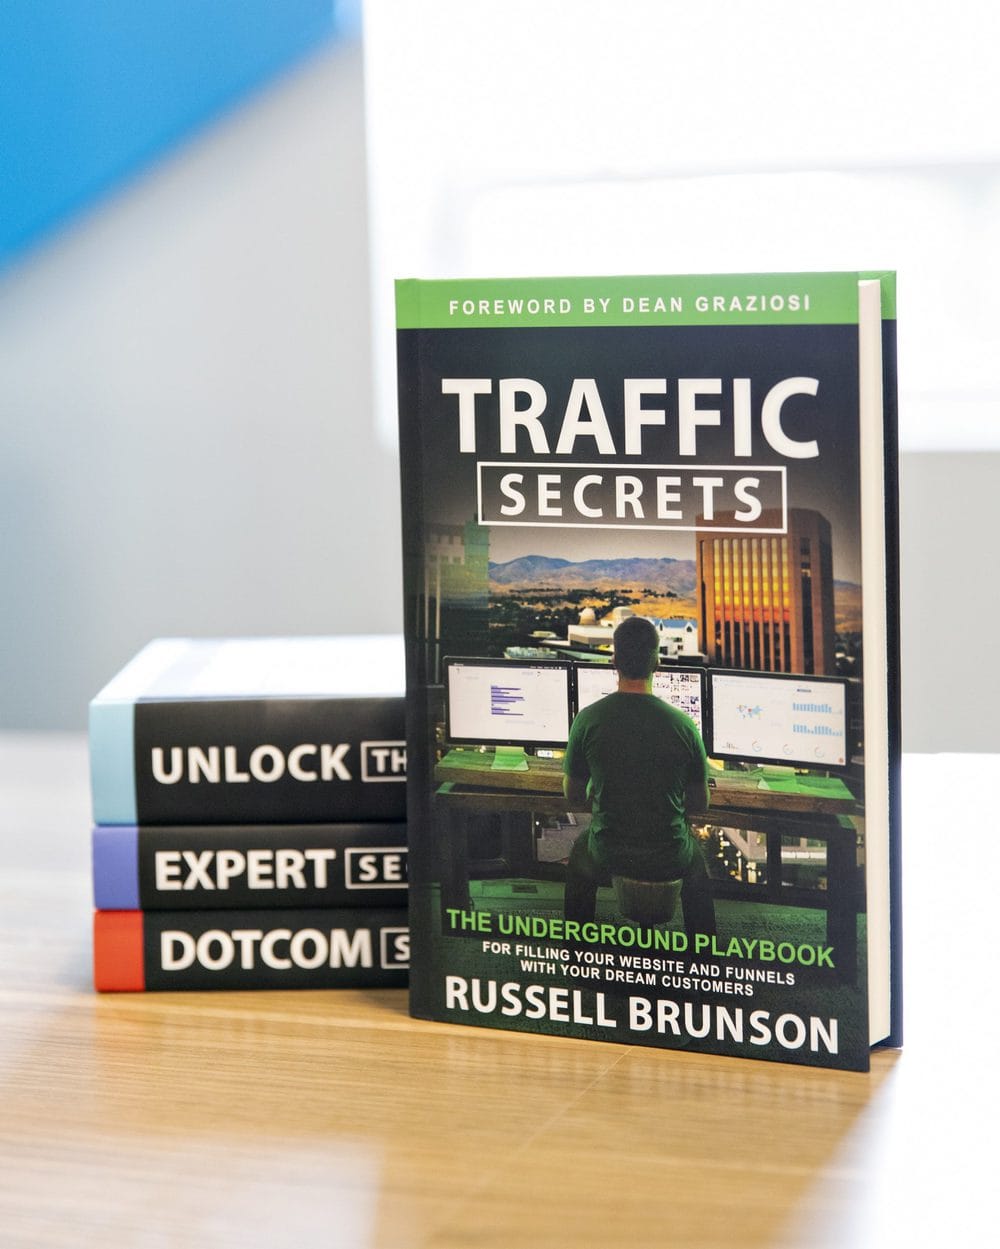 Why I am Taking a Challenge with Traffic Secrets